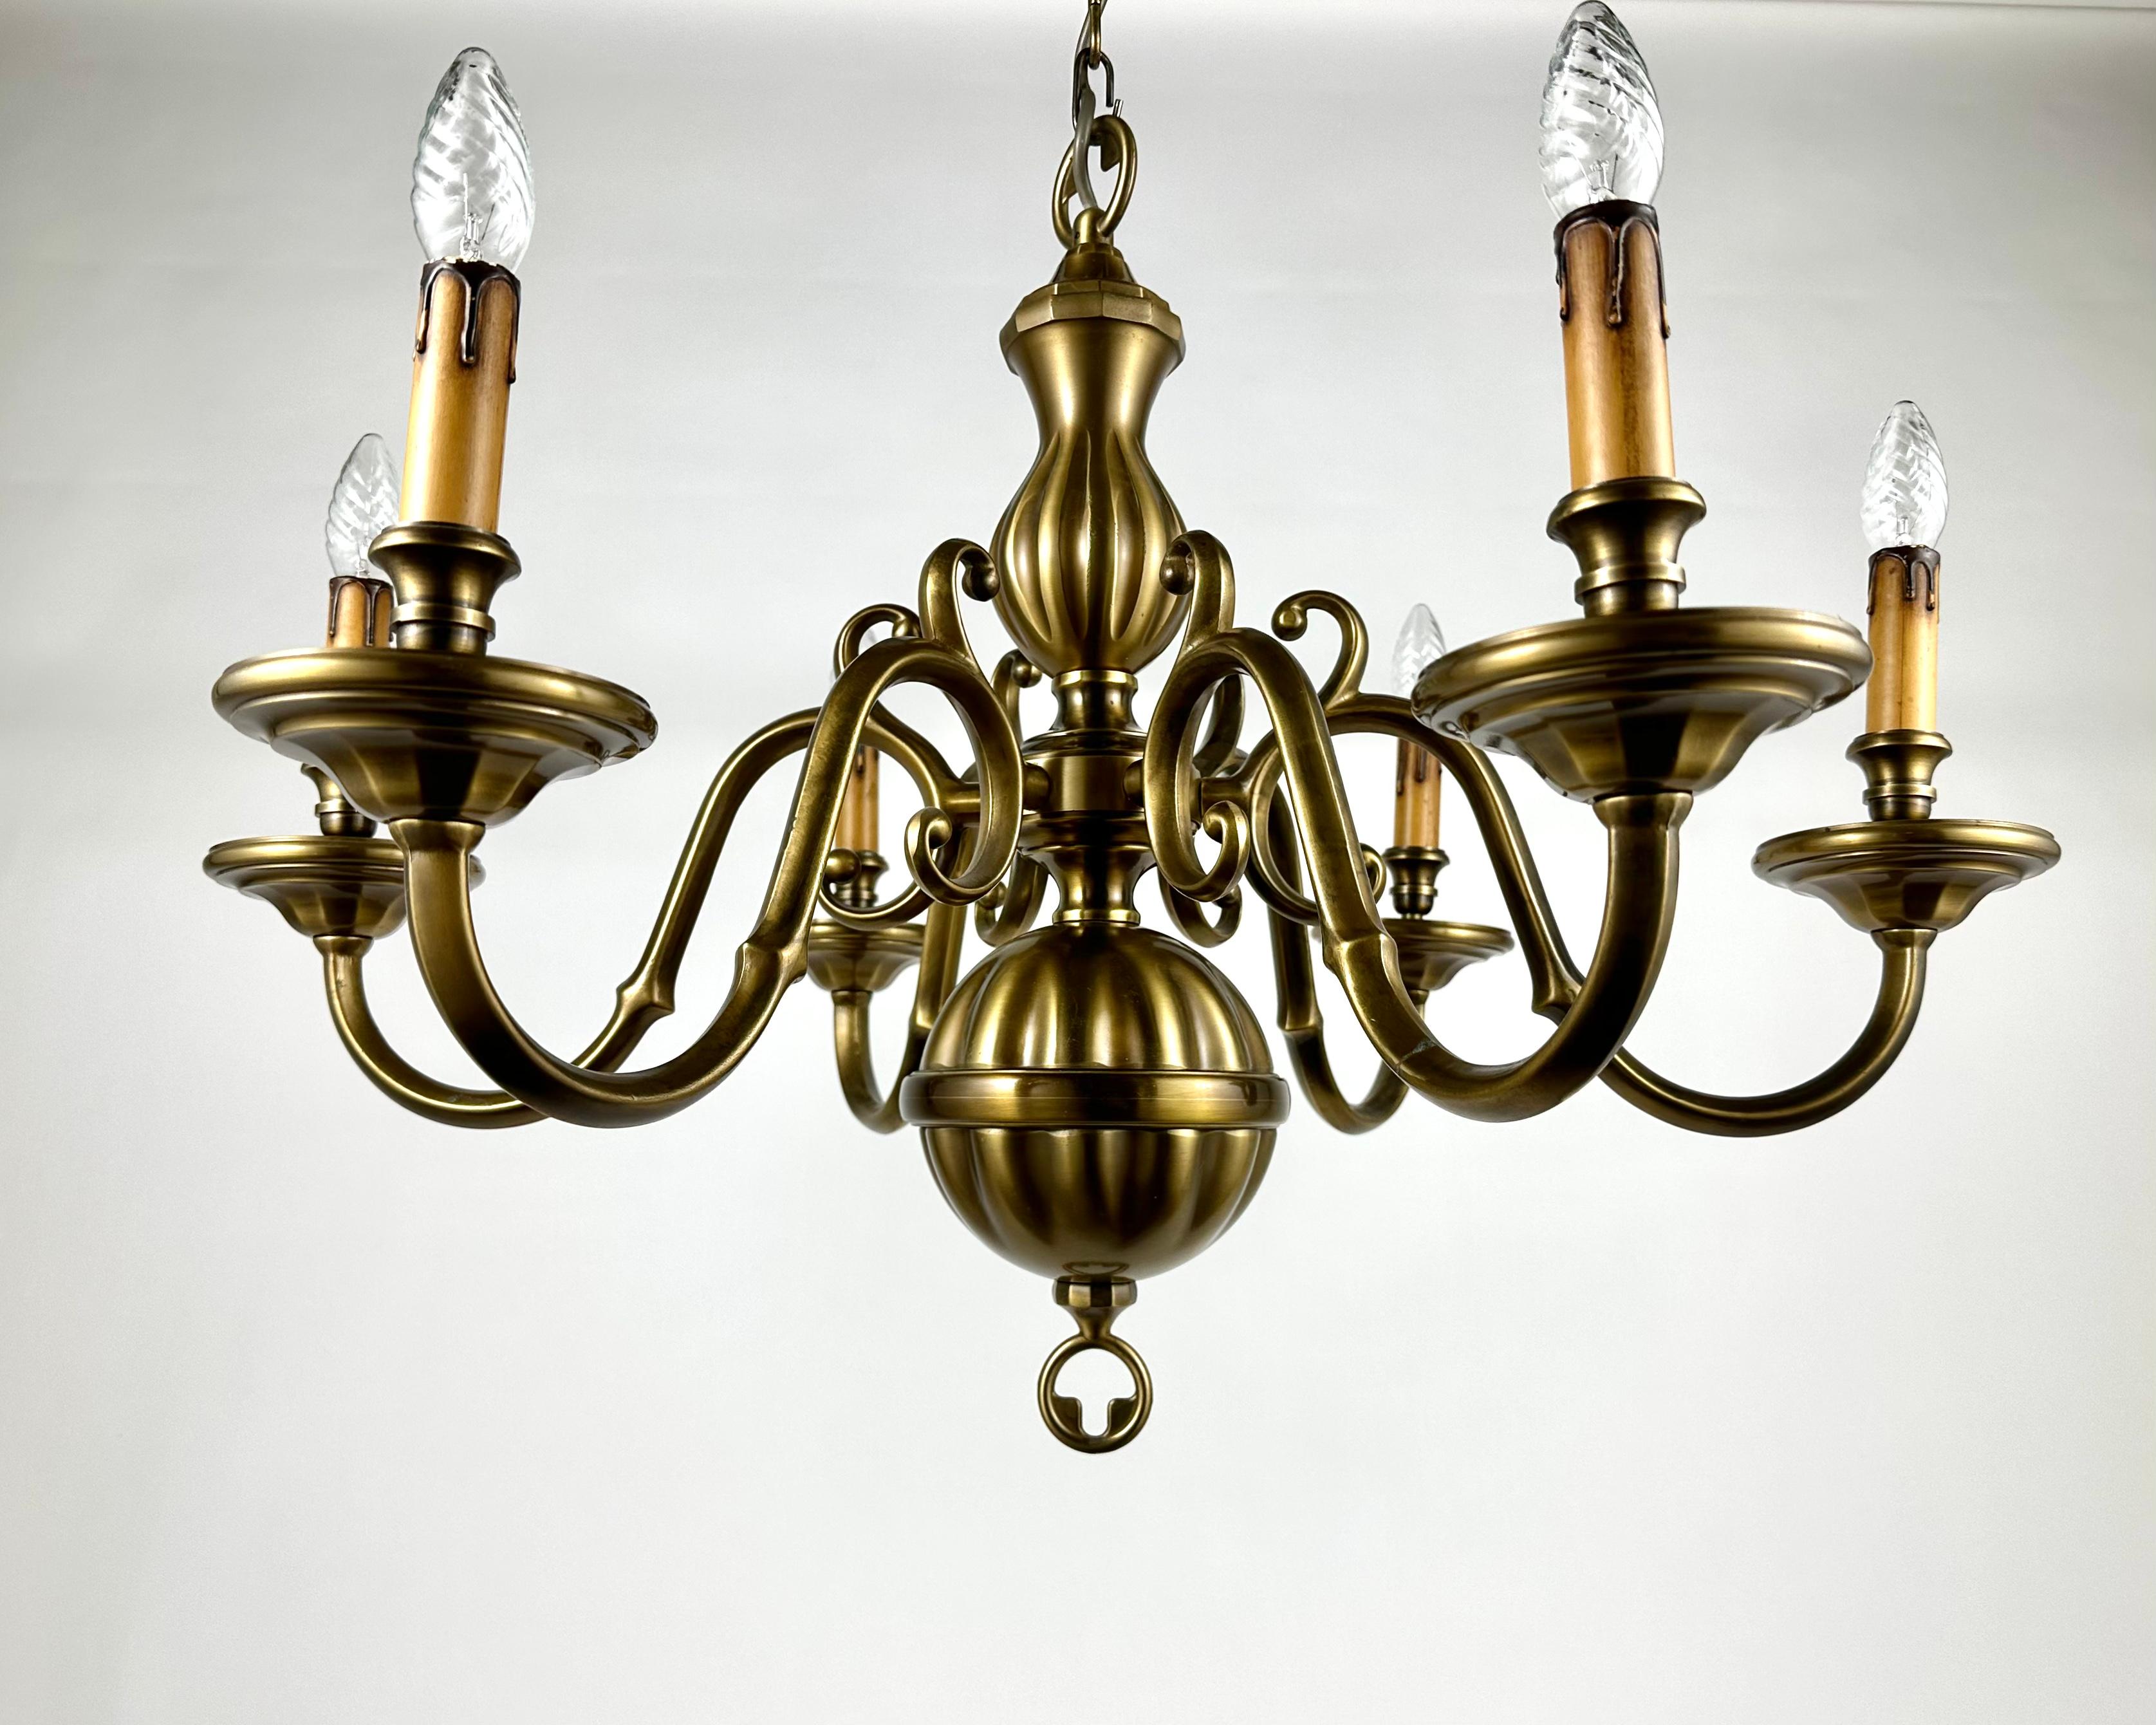 Very Beautiful Vintage Ceiling Chandelier in Bronze by Deknudt, Belgium. 

Circa 1970s.

A very nicely chased vintage six light chandelier in bronze with its original gilded finish.

The forged bronze arms spring off a body and support foliate cups